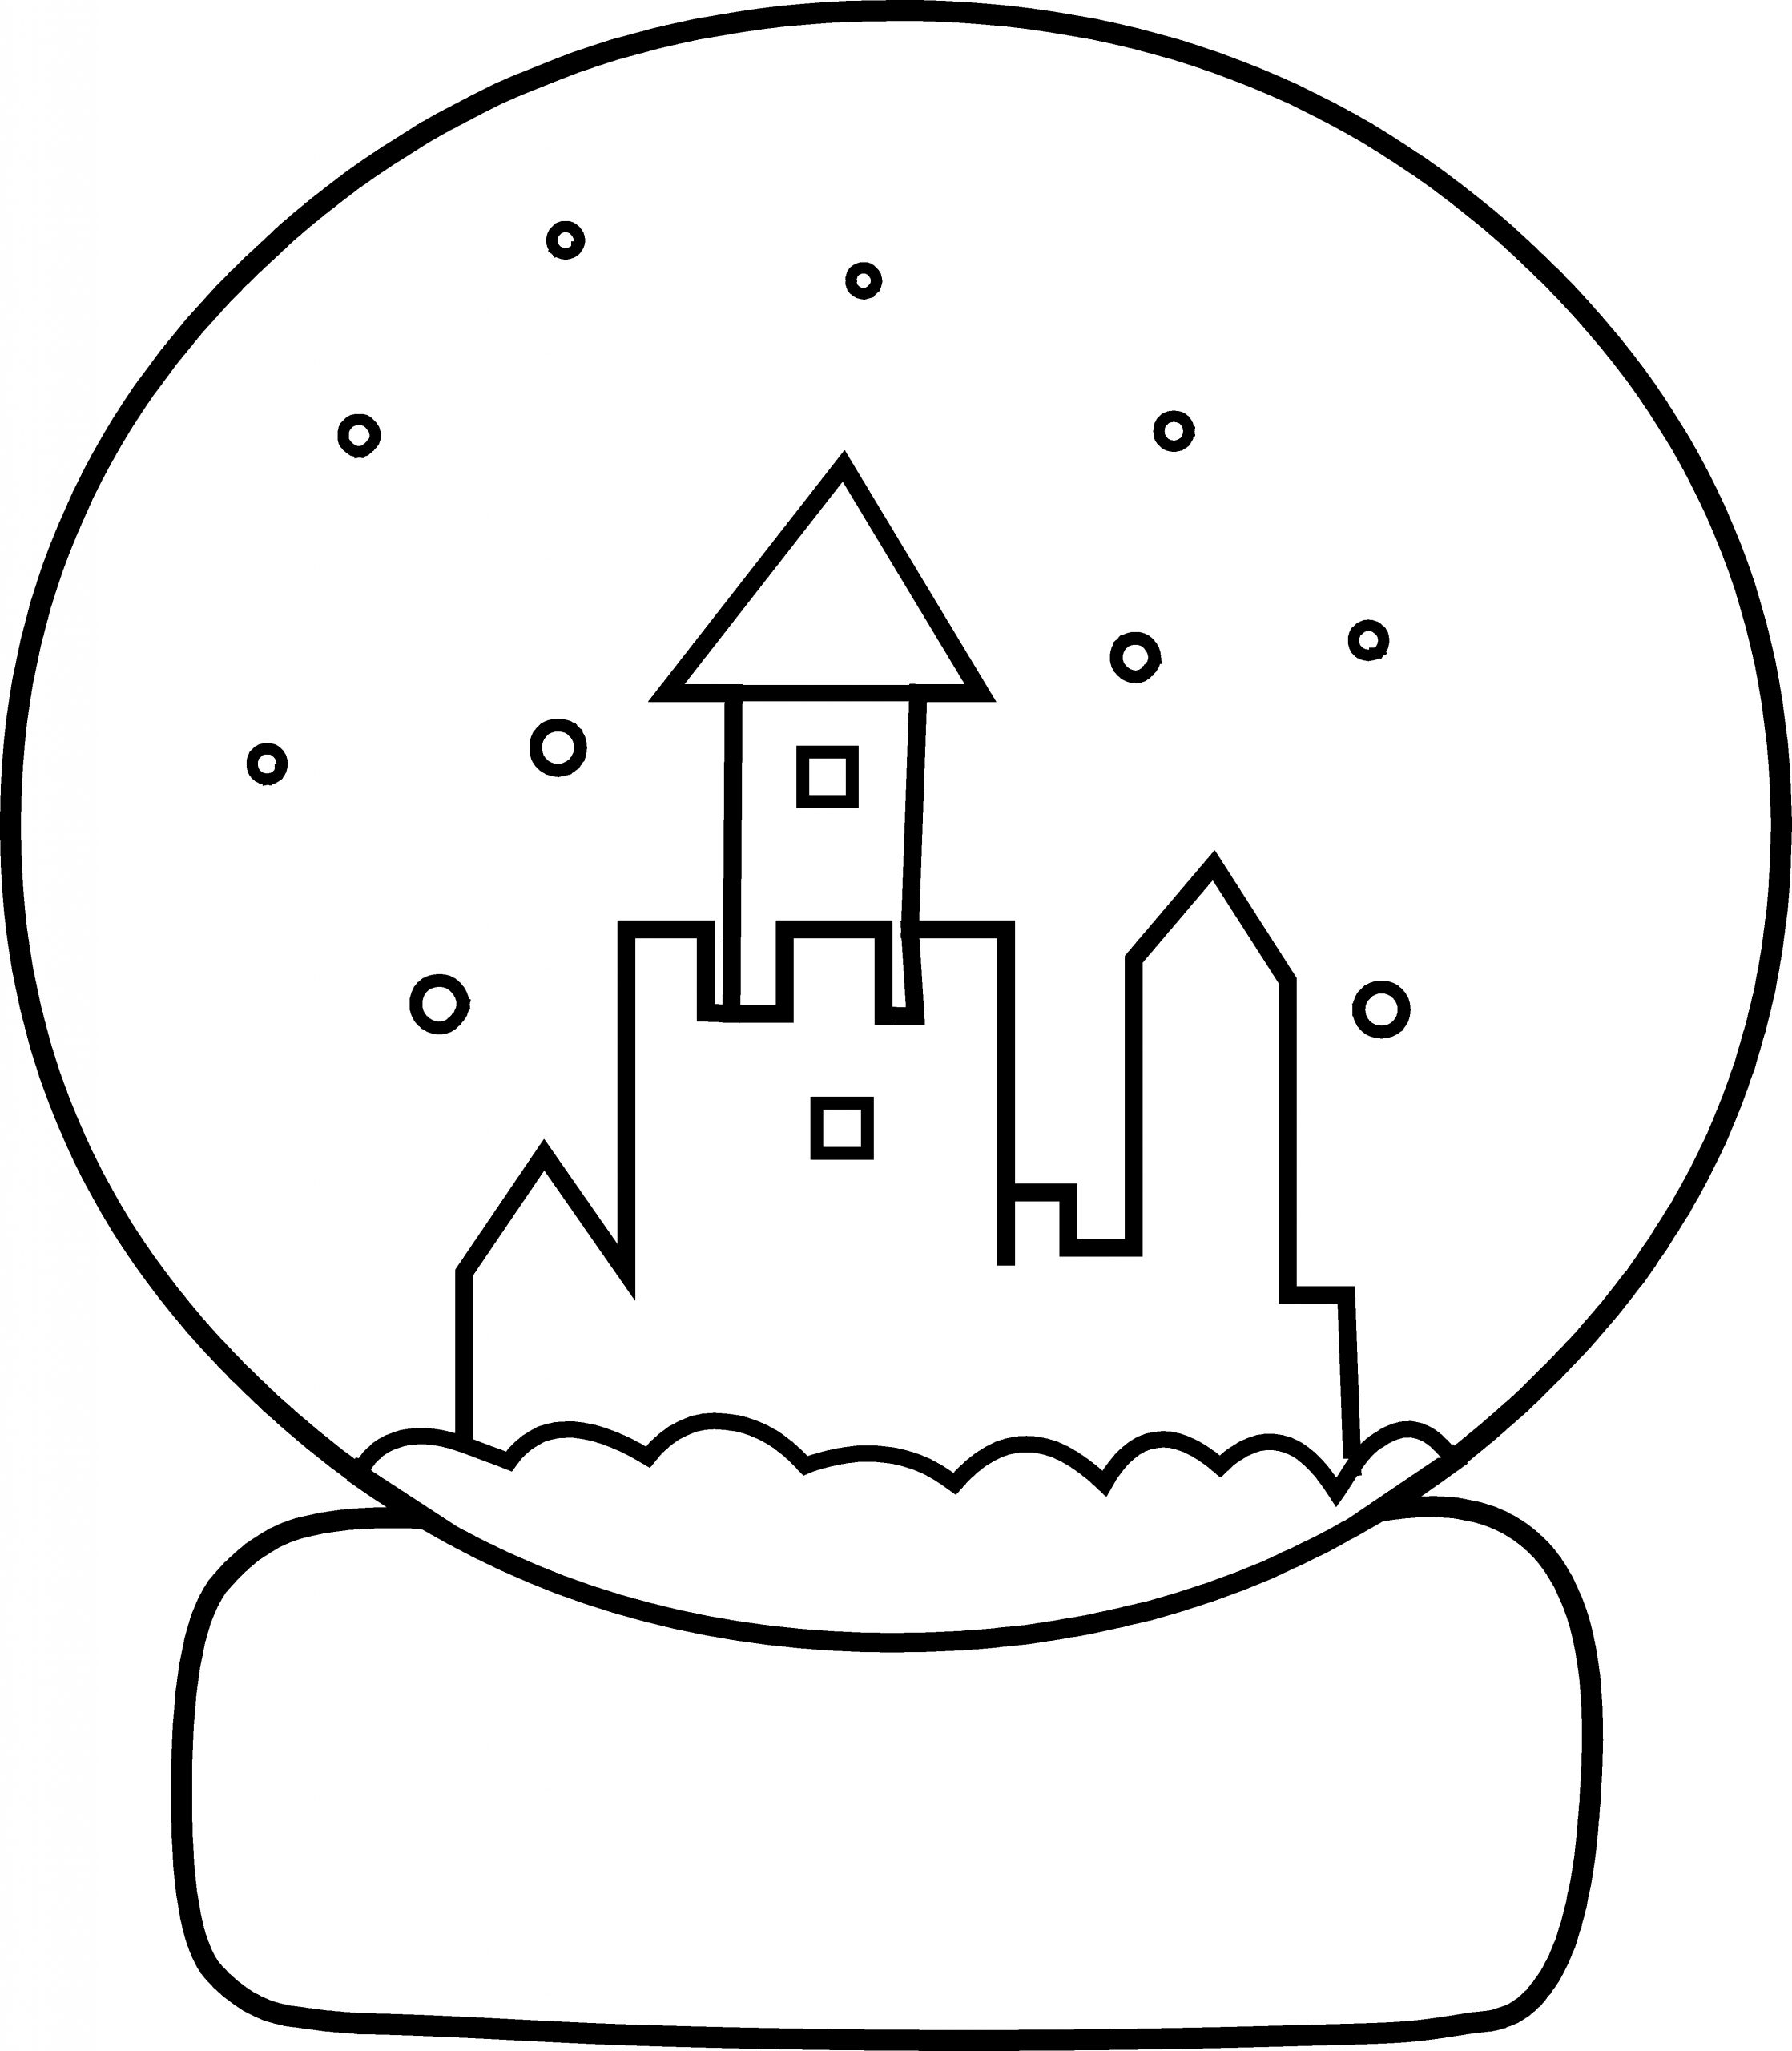 Easy Snowglobes